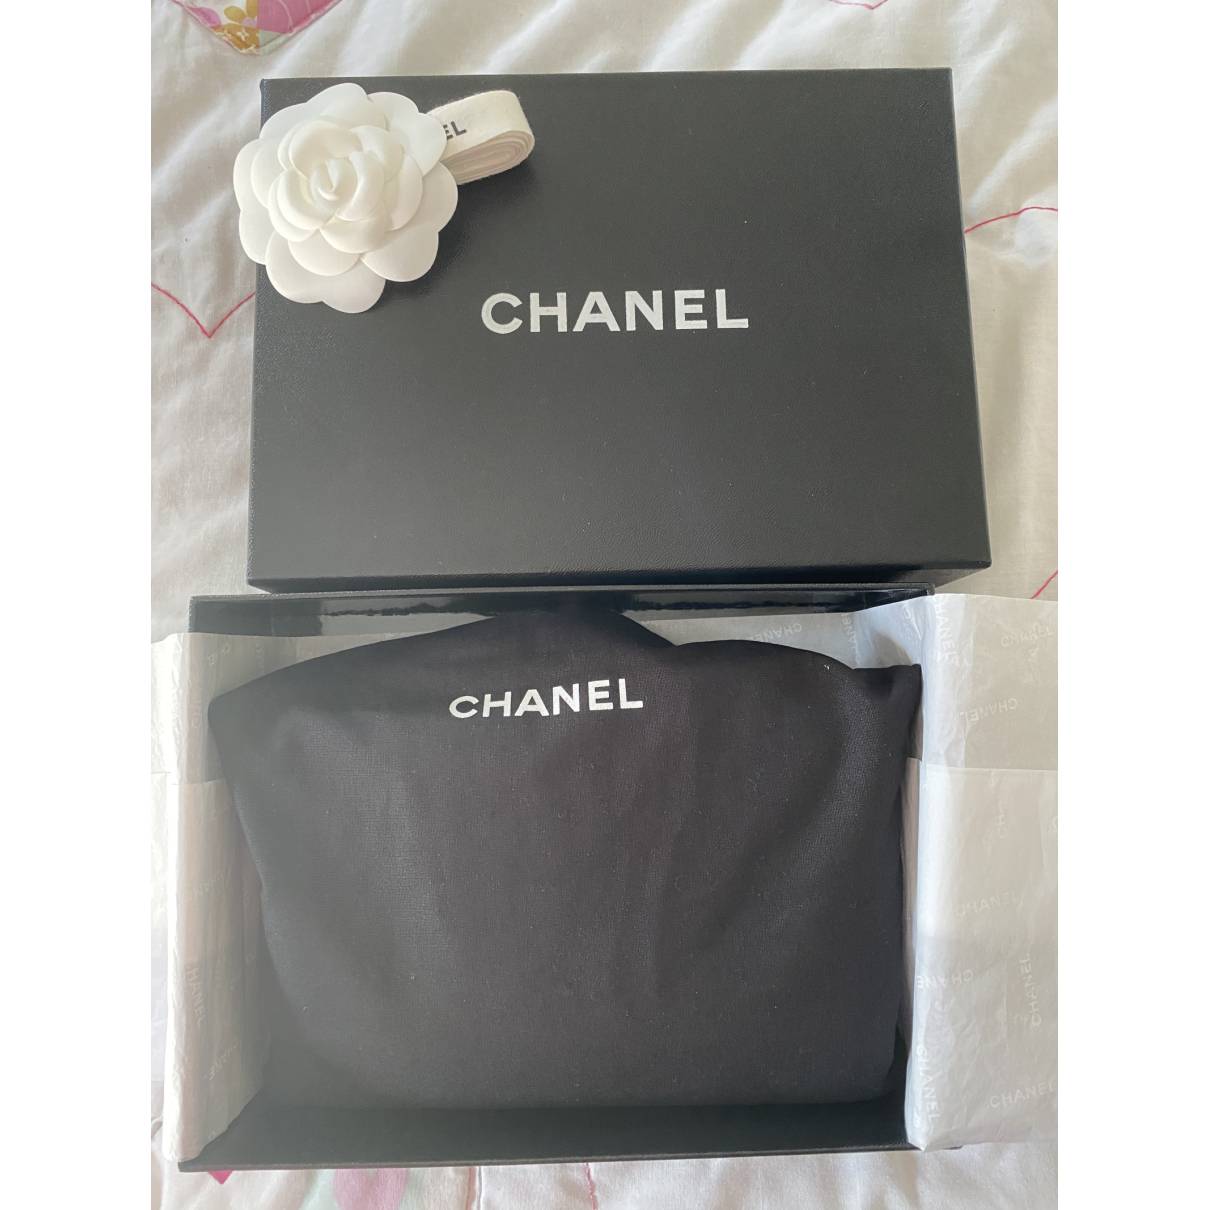 How To Get A Chanel Dust Bag?